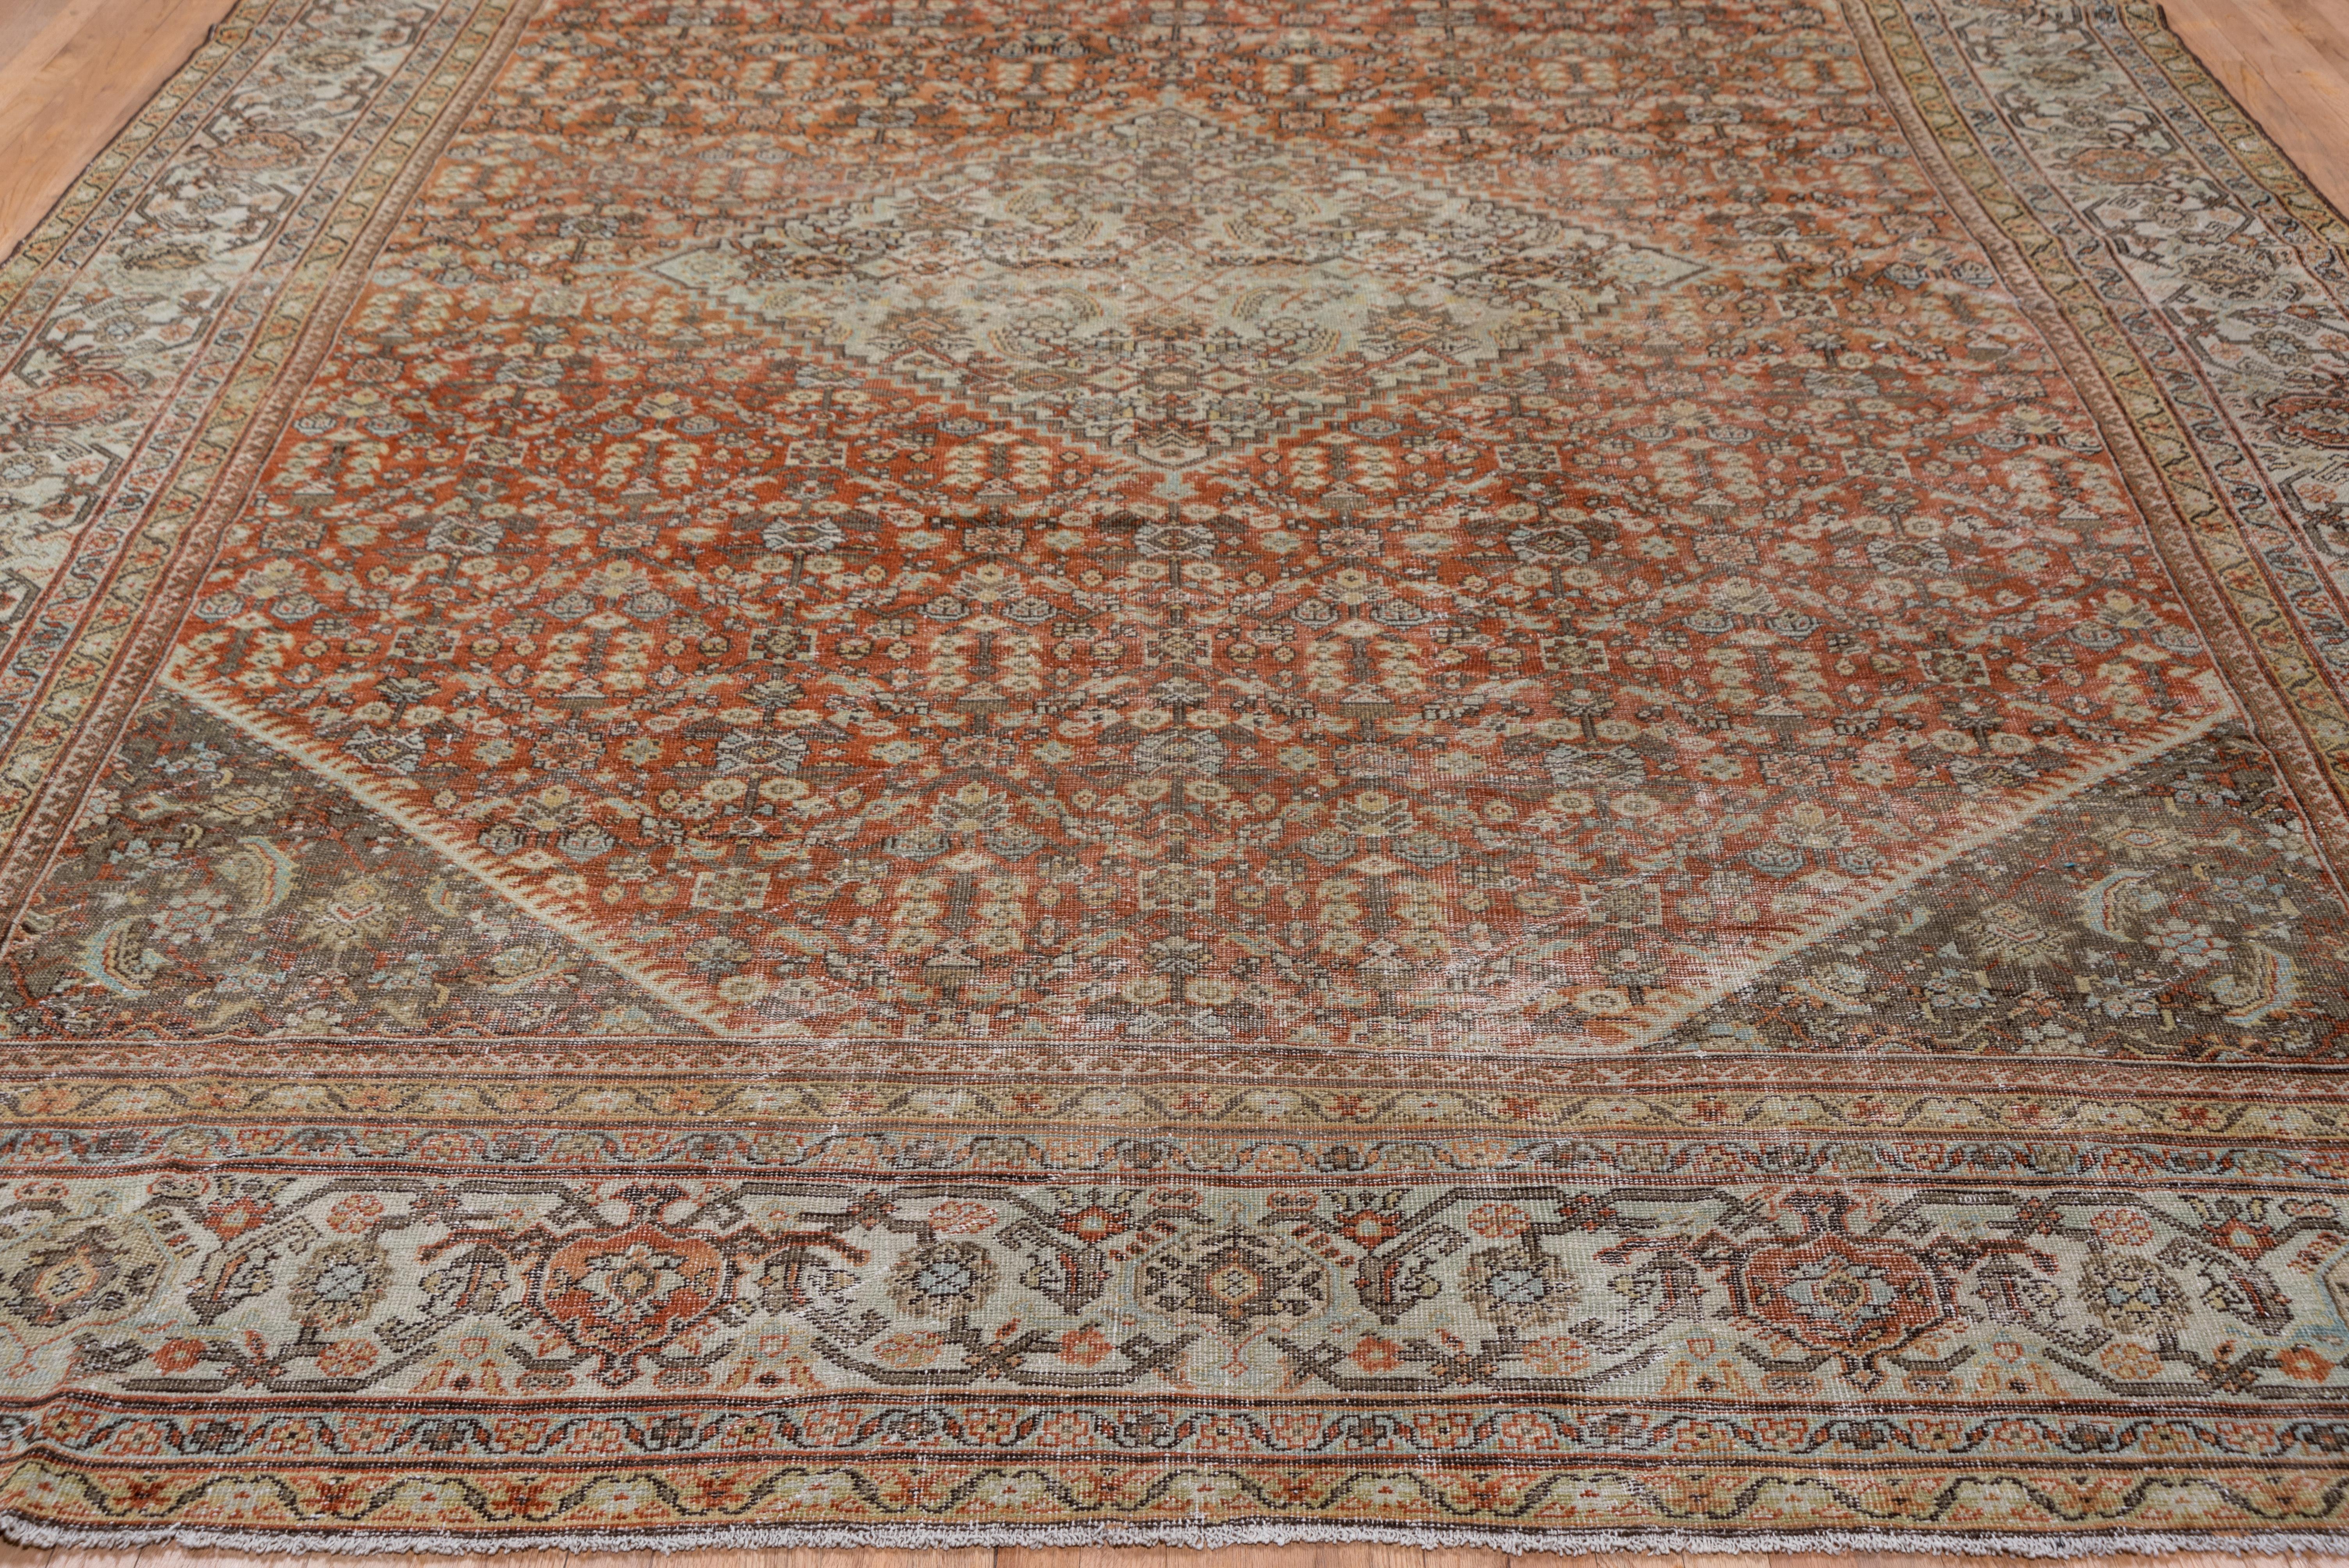 Antique Rustic Persian Mahal Carpet In Good Condition For Sale In New York, NY